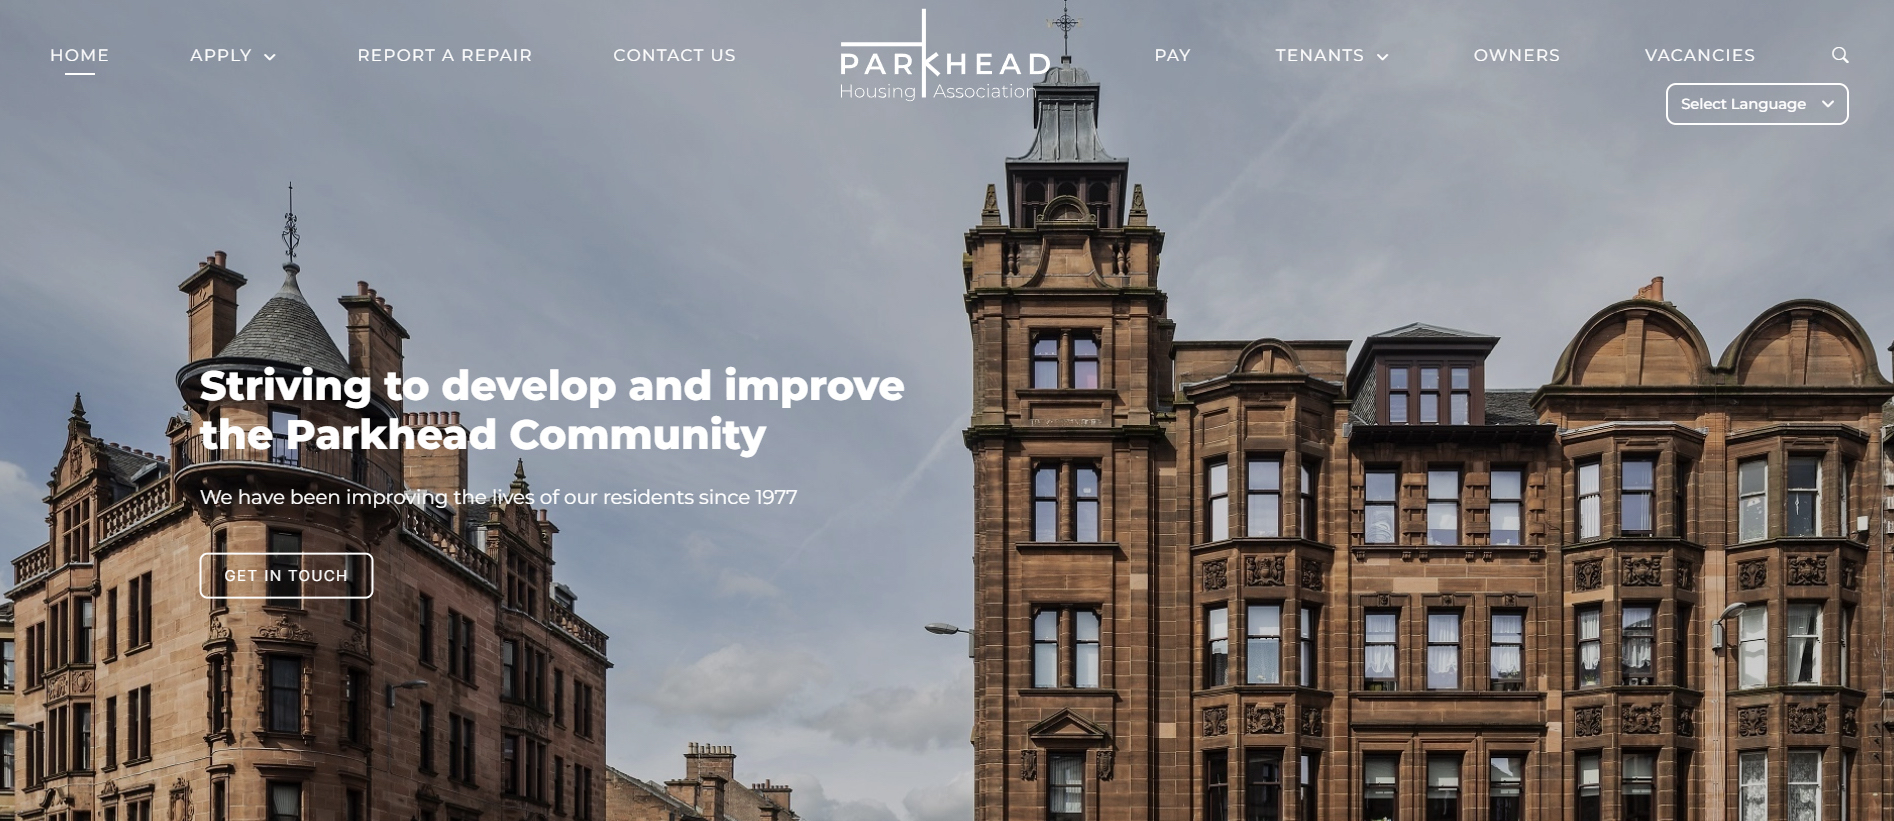 New beginnings for Parkhead HA as revamped branding and website launched